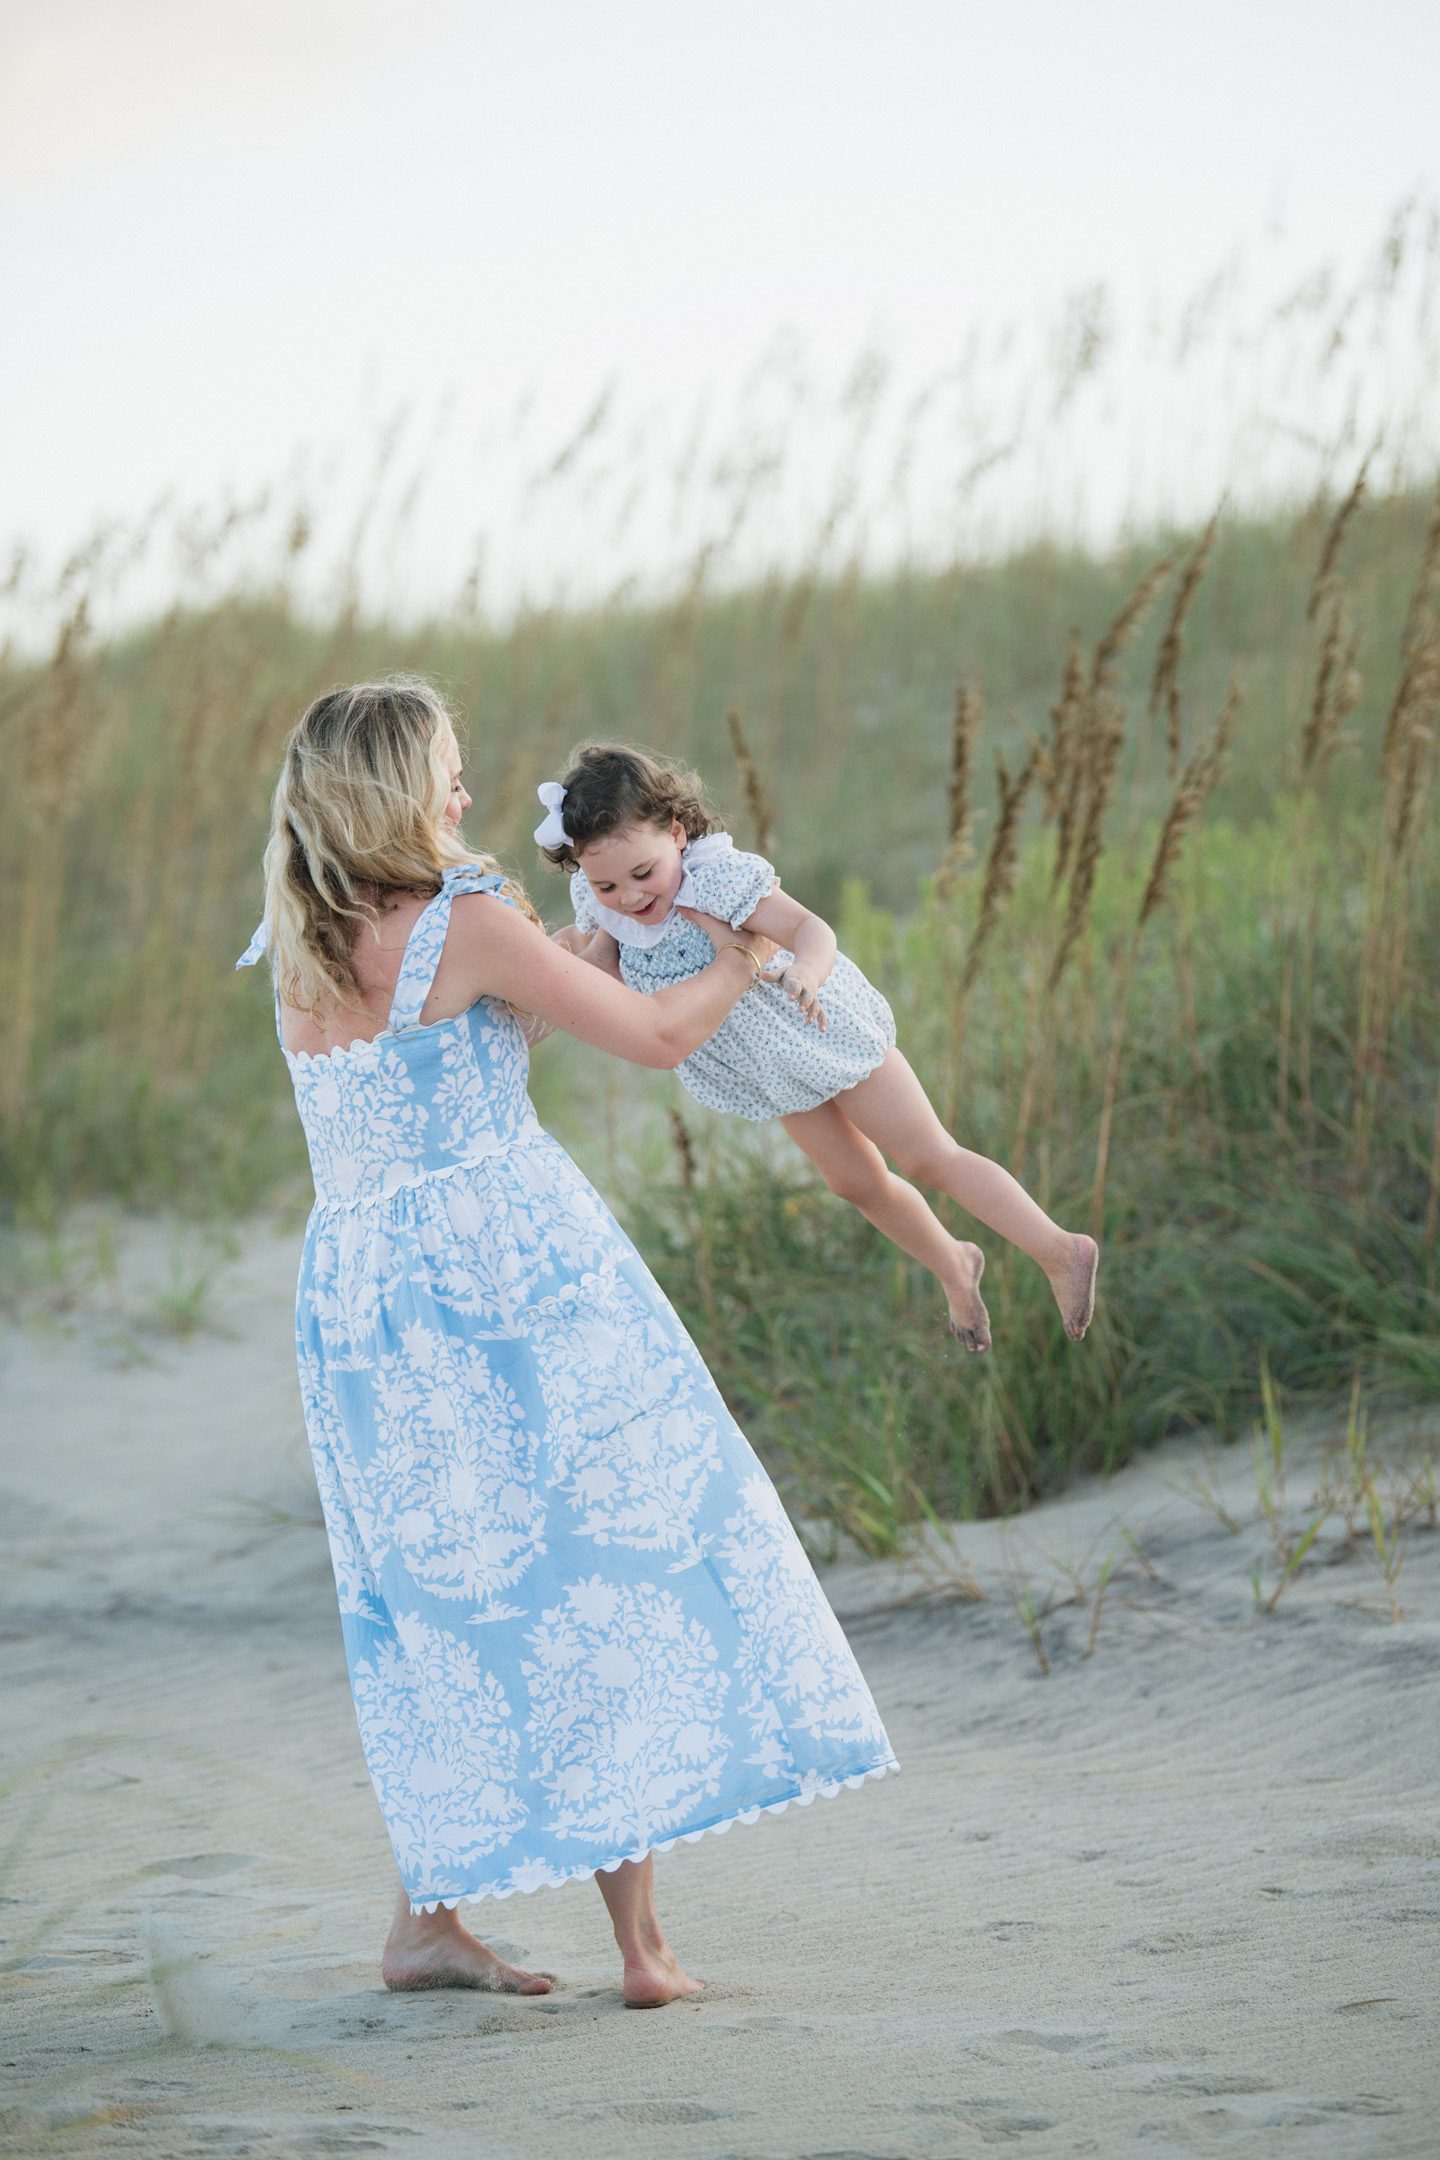 A mother and daughter playing together on the beach in Outer Banks